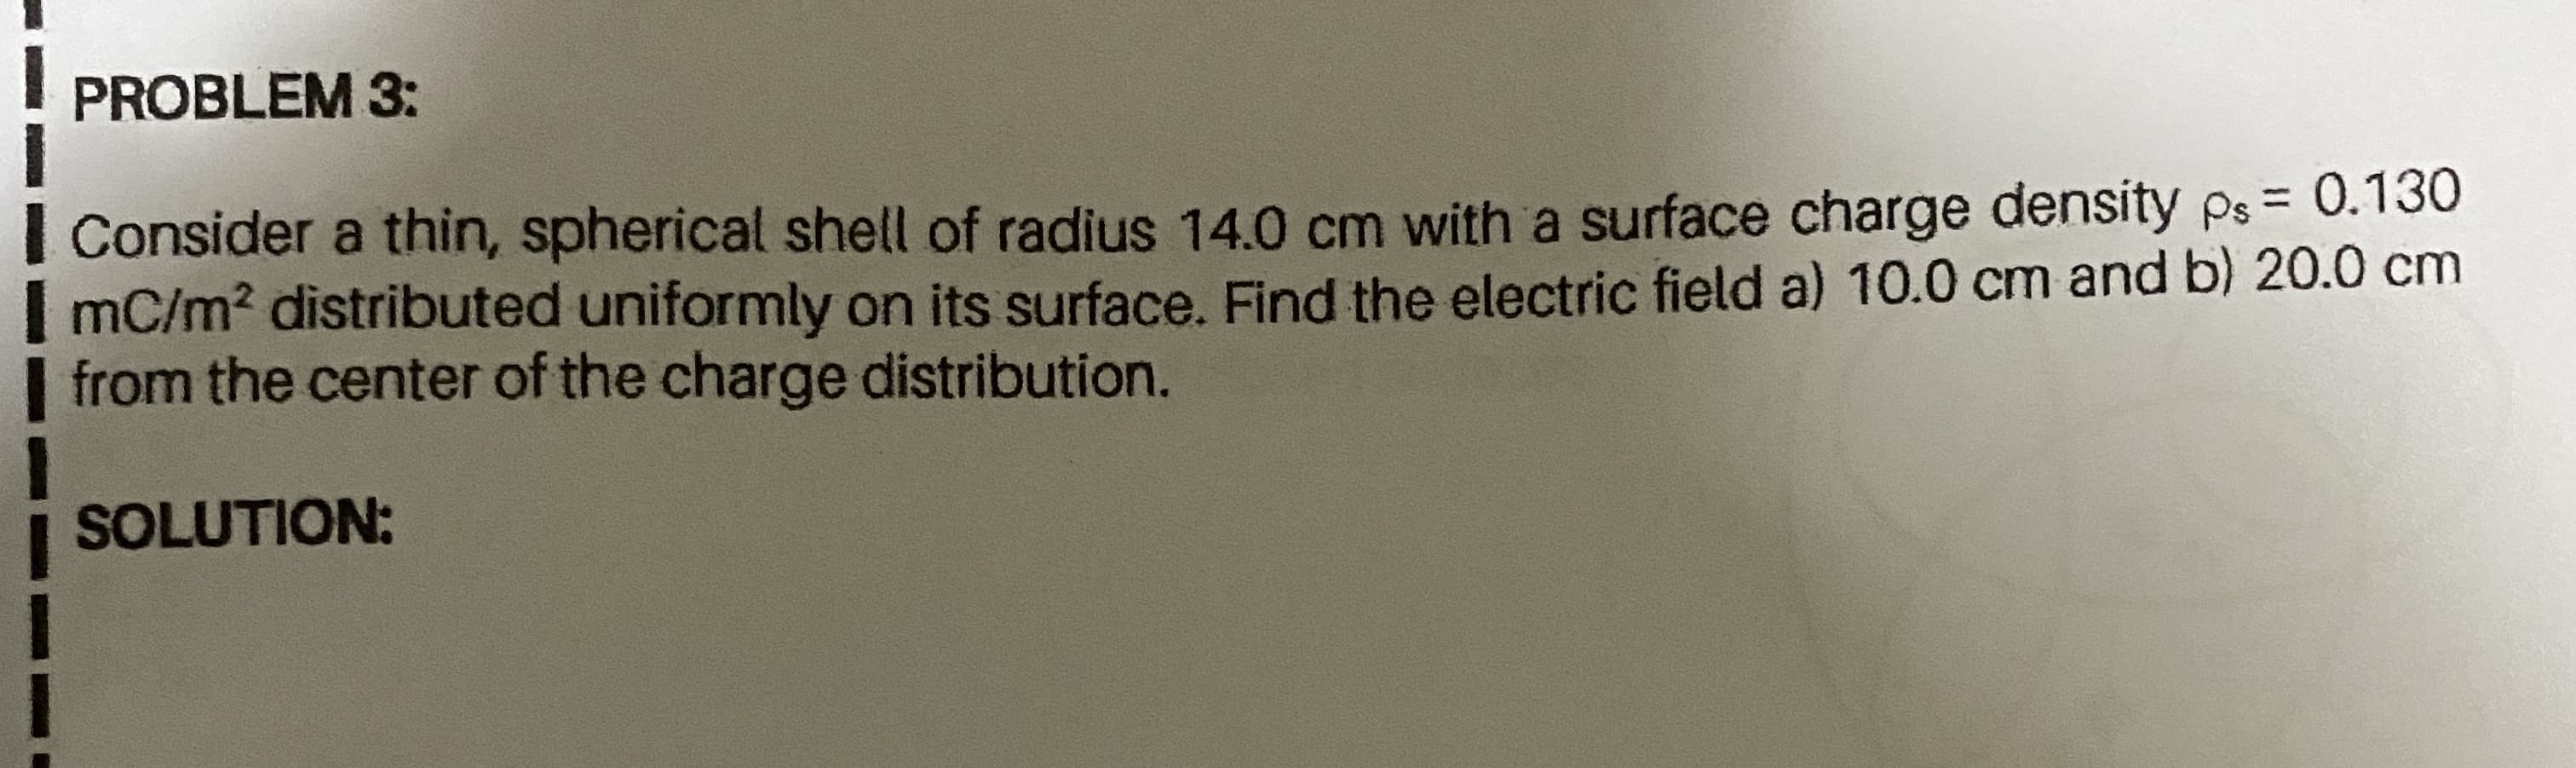 PROBLEM 3:
= 0.130
Consider a thin, spherical shell of radius 14.0 cm with a surface charge density ps =
I mC/m² distributed uniformly on its surface. Find the electric field a) 10.0 cm and b) 20.0 cm
from the center of the charge distribution.
SOLUTION:
